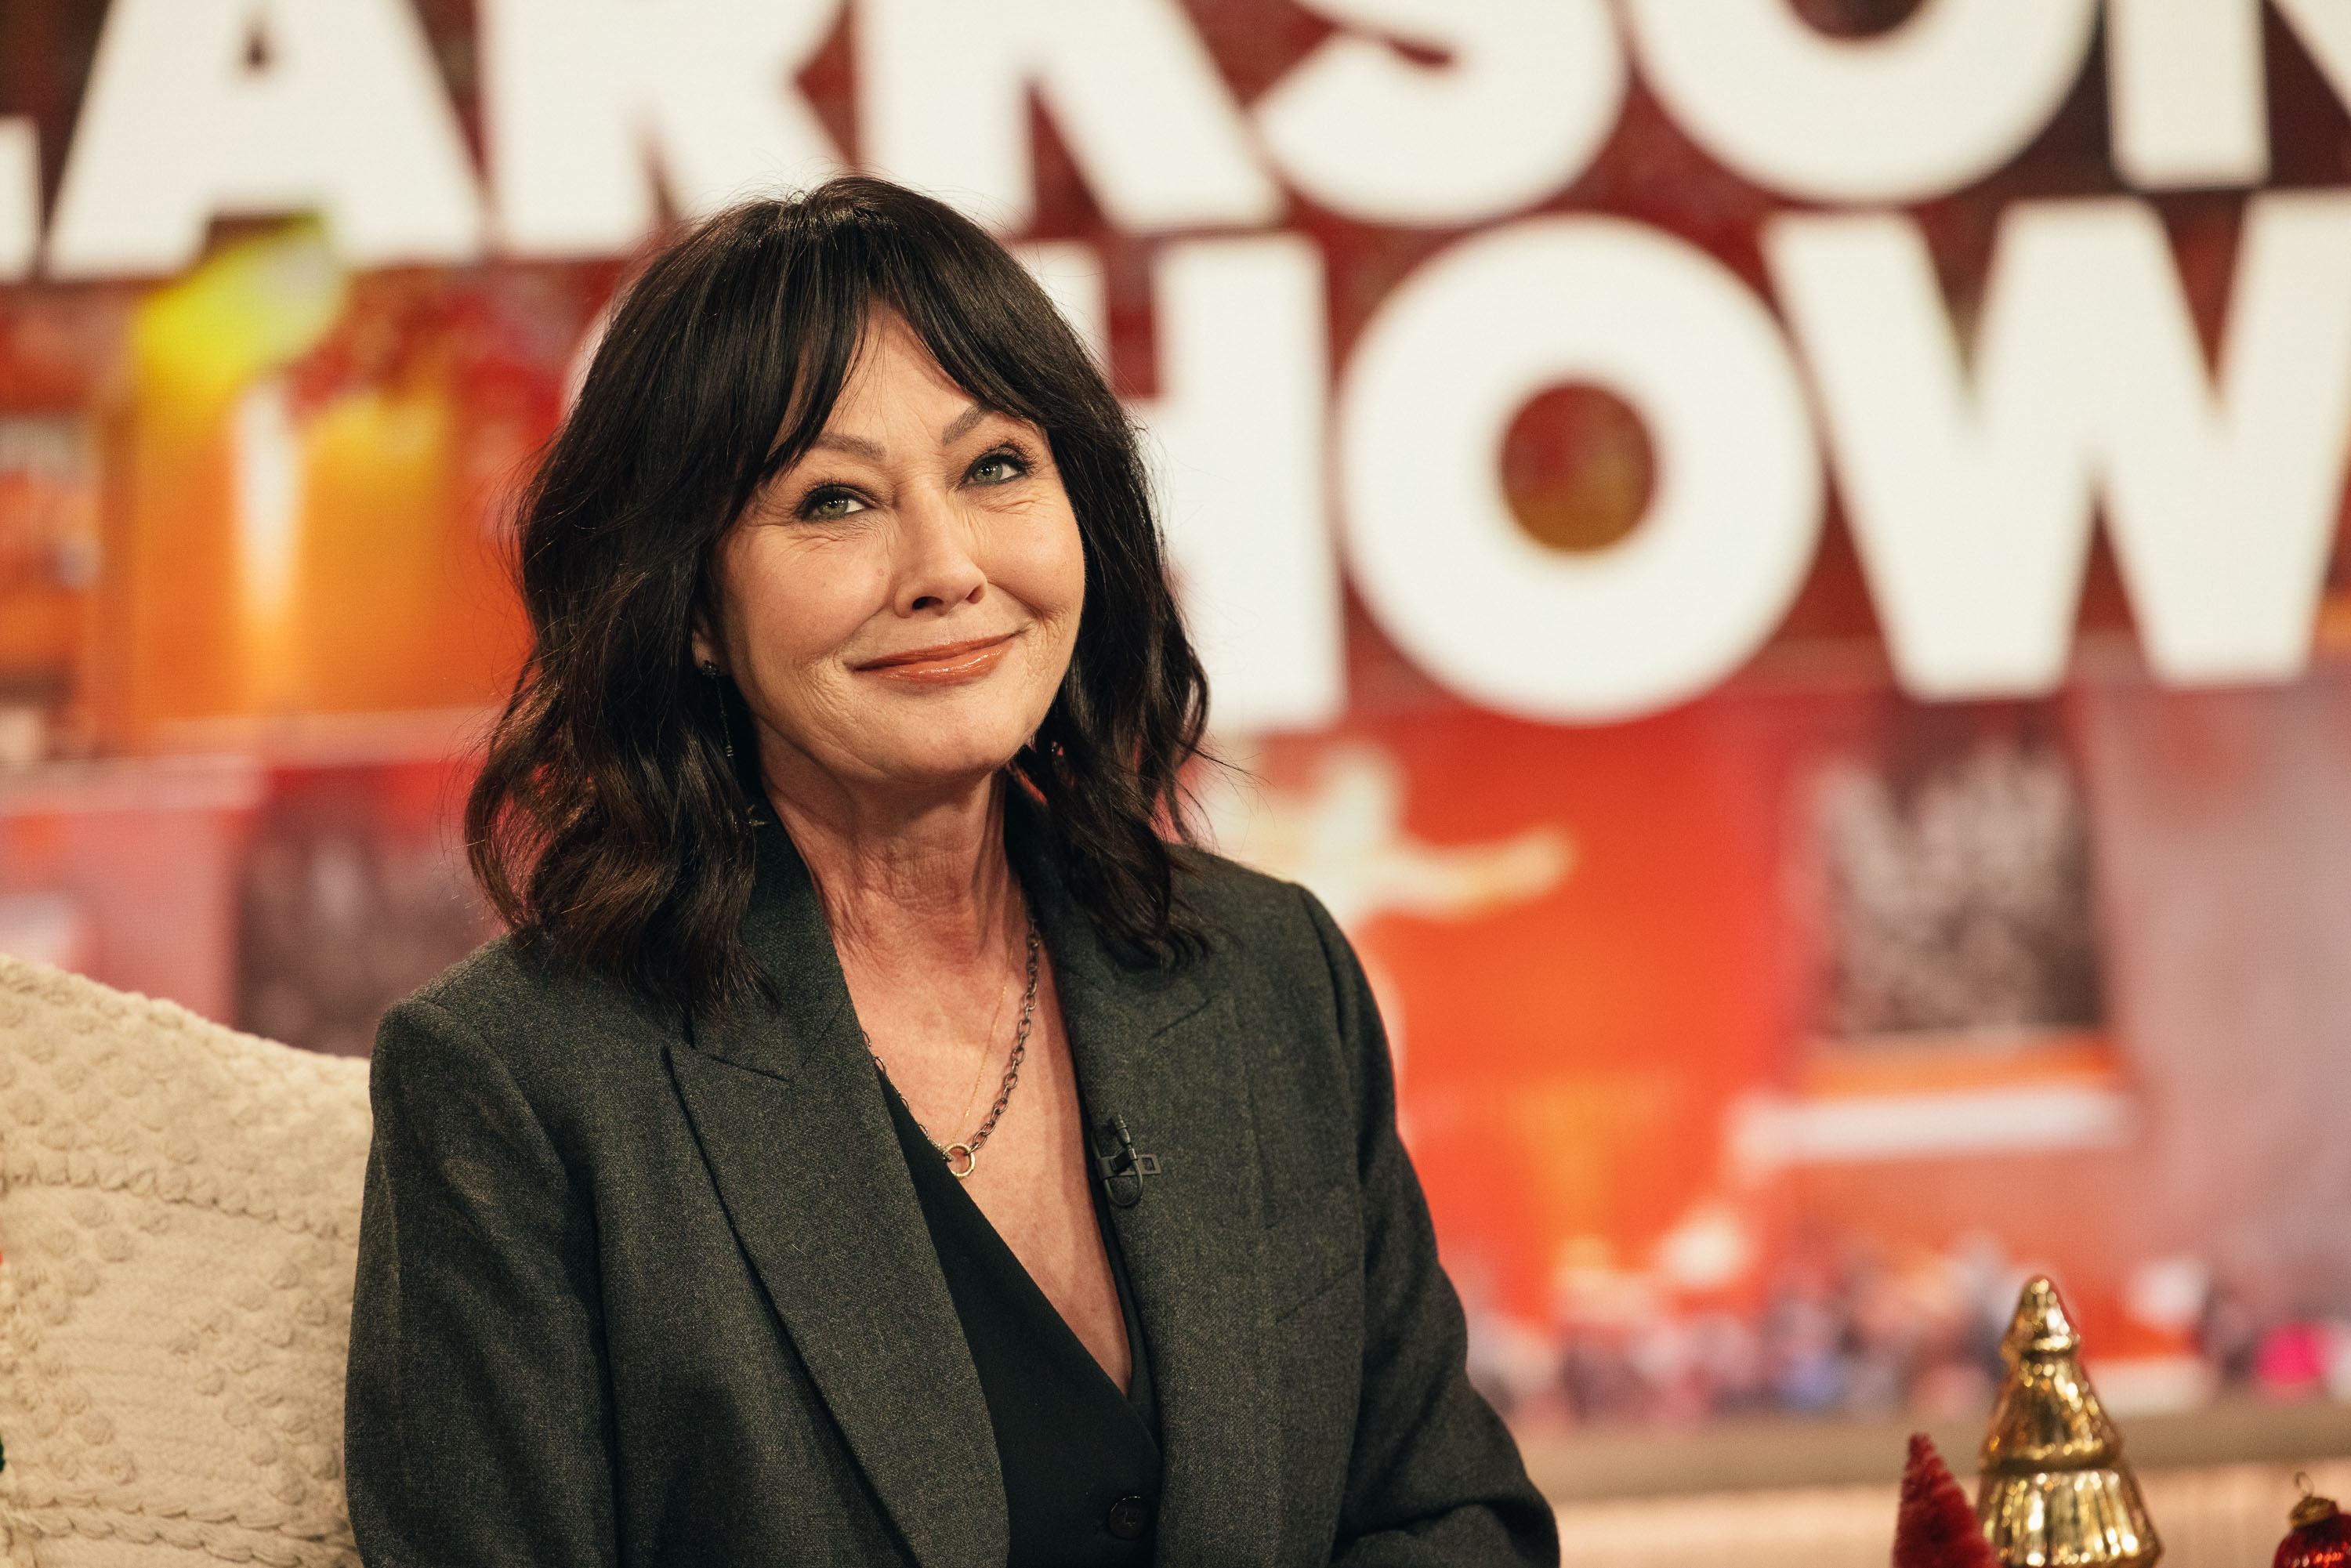 Shannen Doherty on a Season 5 episode of "The Kelly Clarkson Show" in 2023. | Source: Getty Images